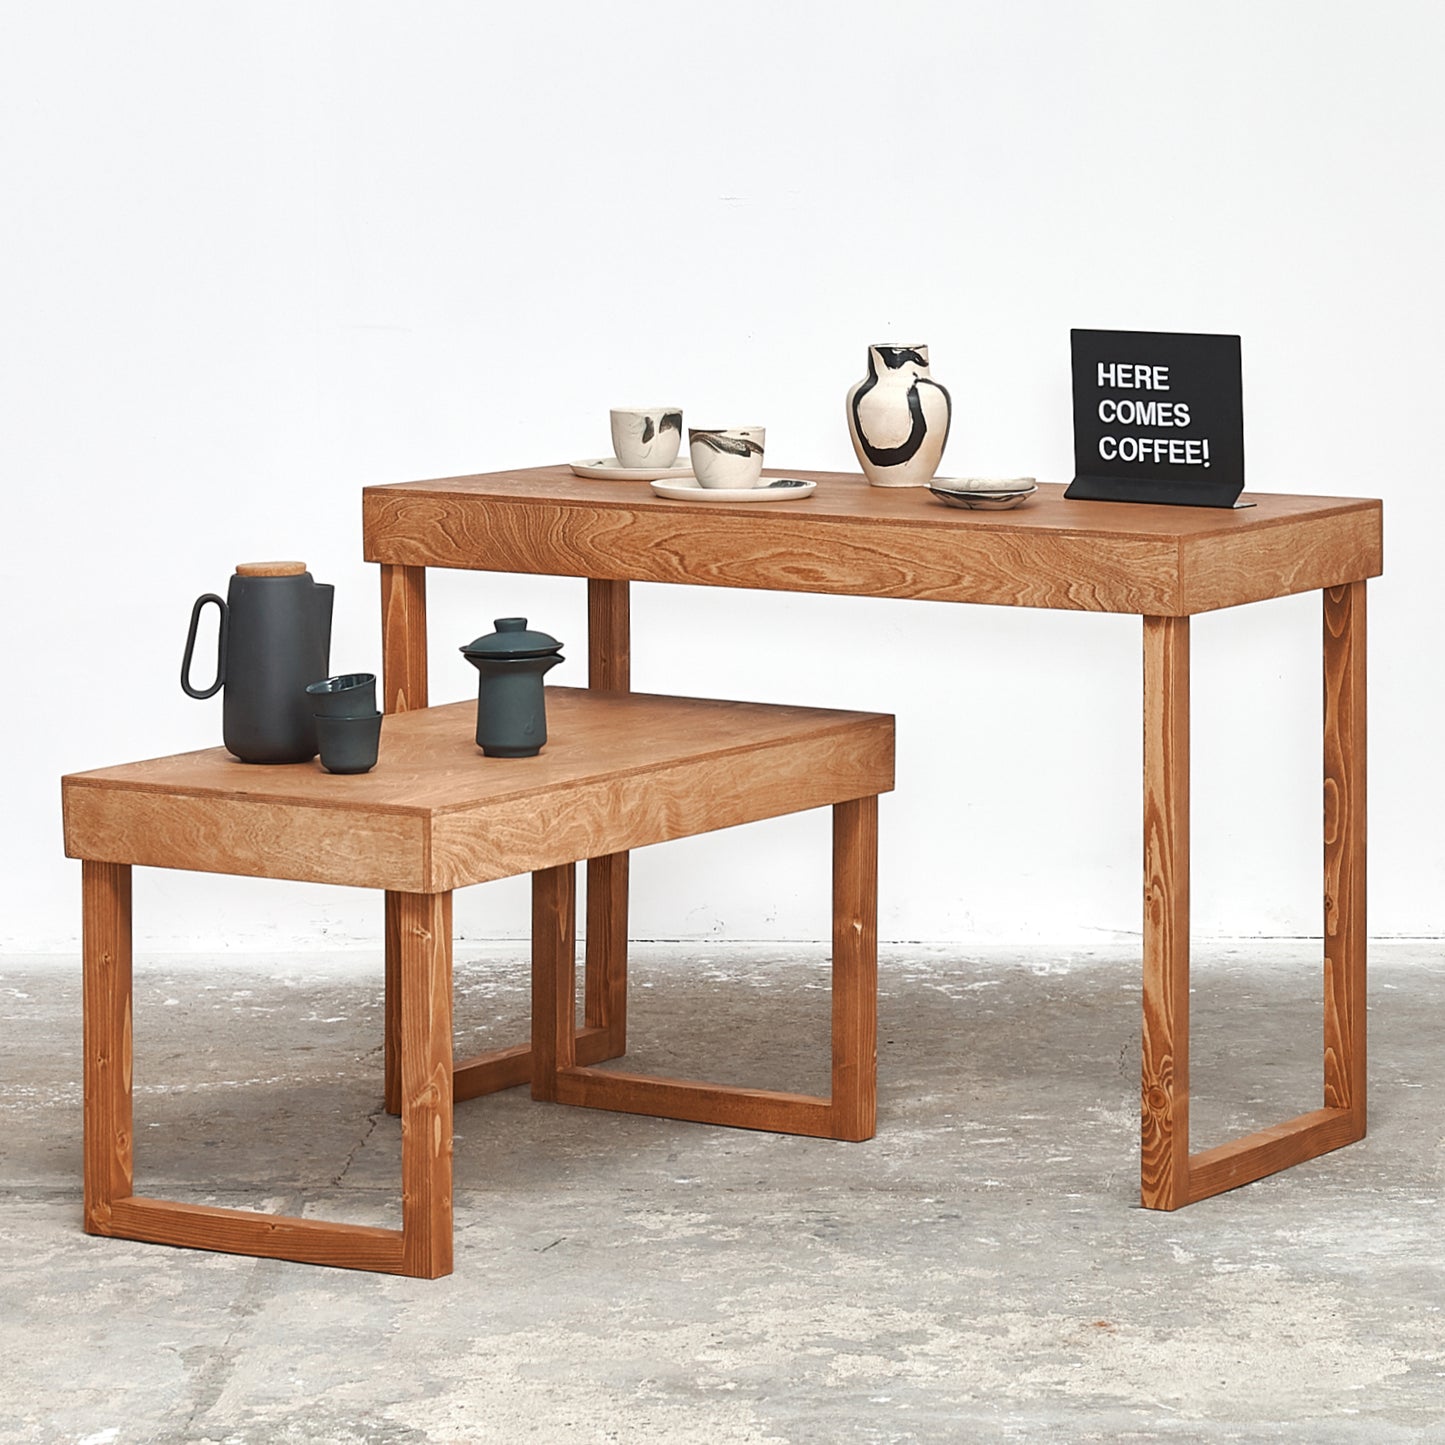 A set of two display tables VC-05-CF, perfect as a craft show display, store tiered display table, vintage vibe